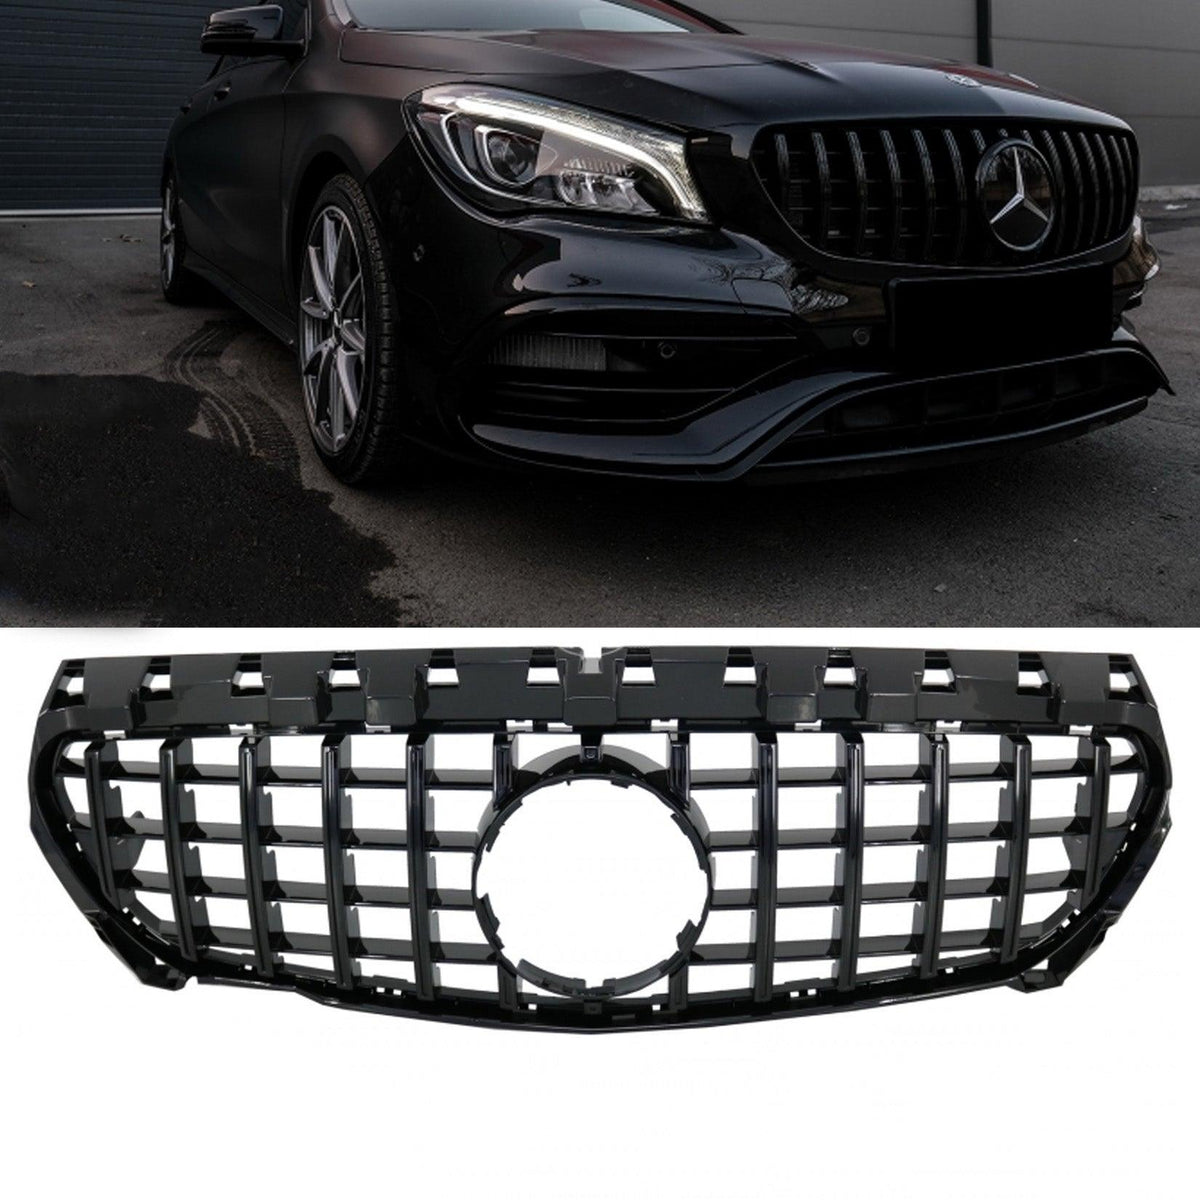 MERCEDES CLA W117 2013-2015 - FRONT GRILL - PANAMERICANA GT-R STYLE - ALL BLACK - RisperStyling